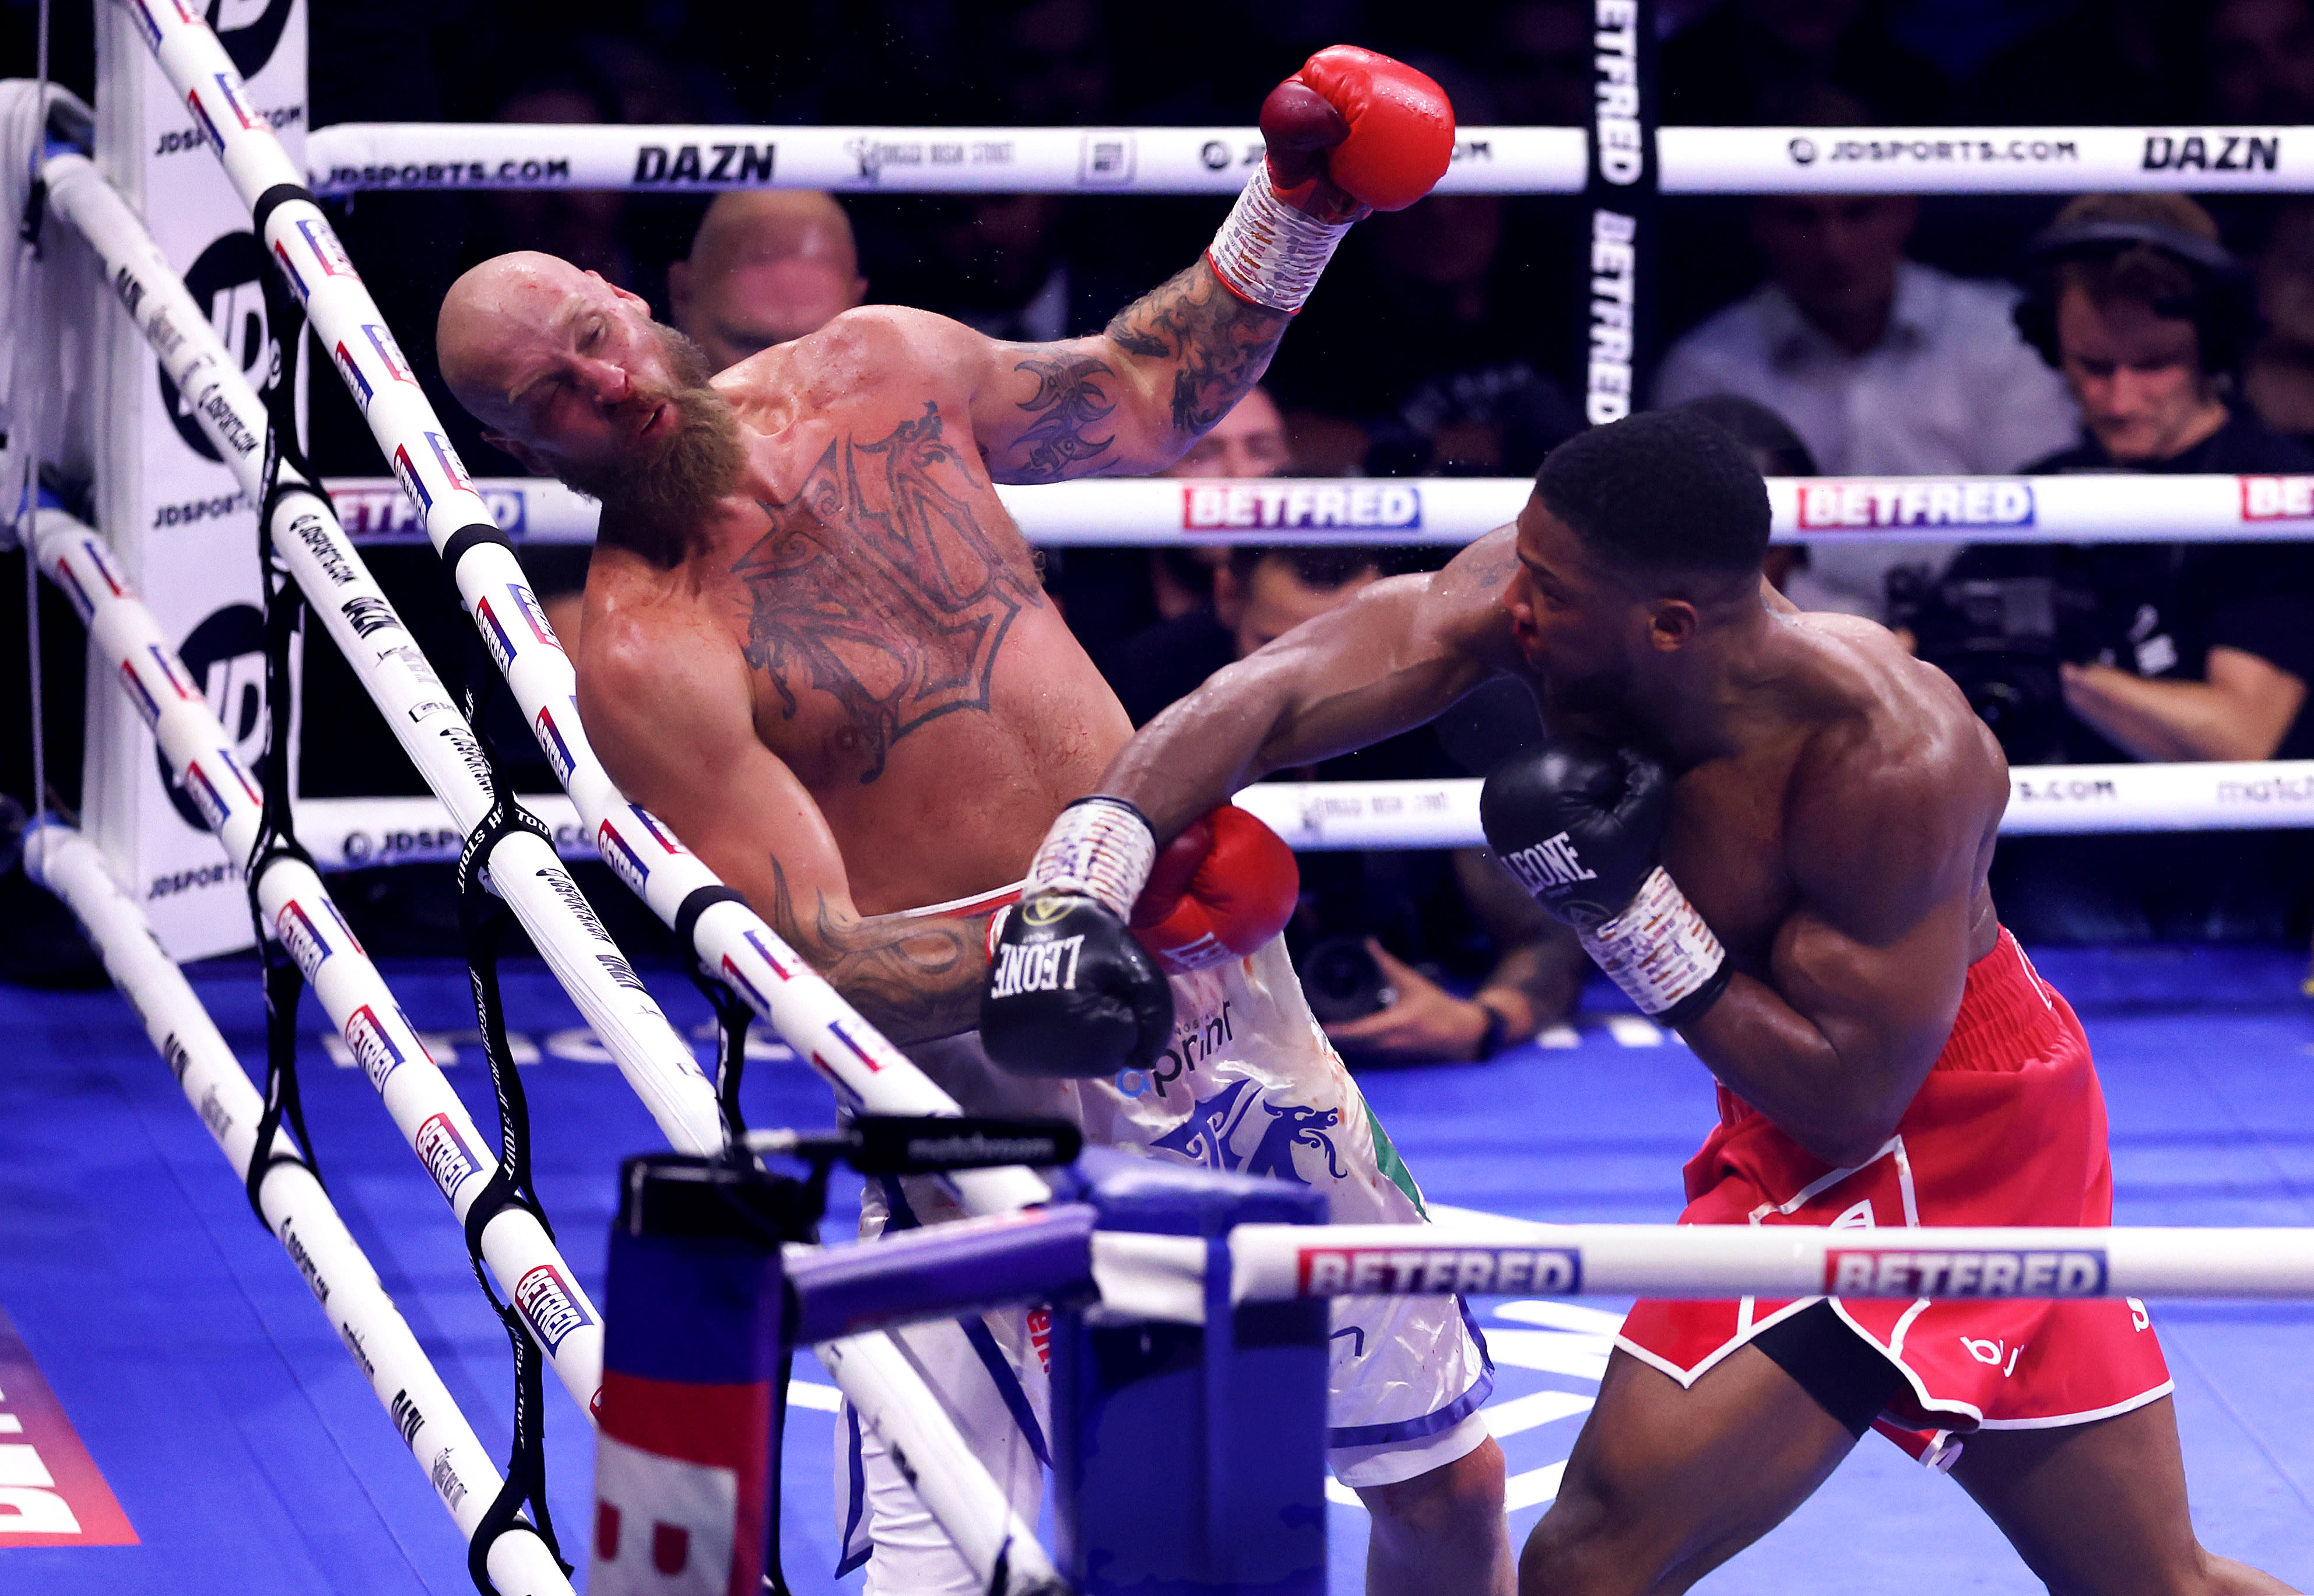 Anthony Joshua brutally knocked out Robert Helenius, but is he ready for Deontay Wilder?